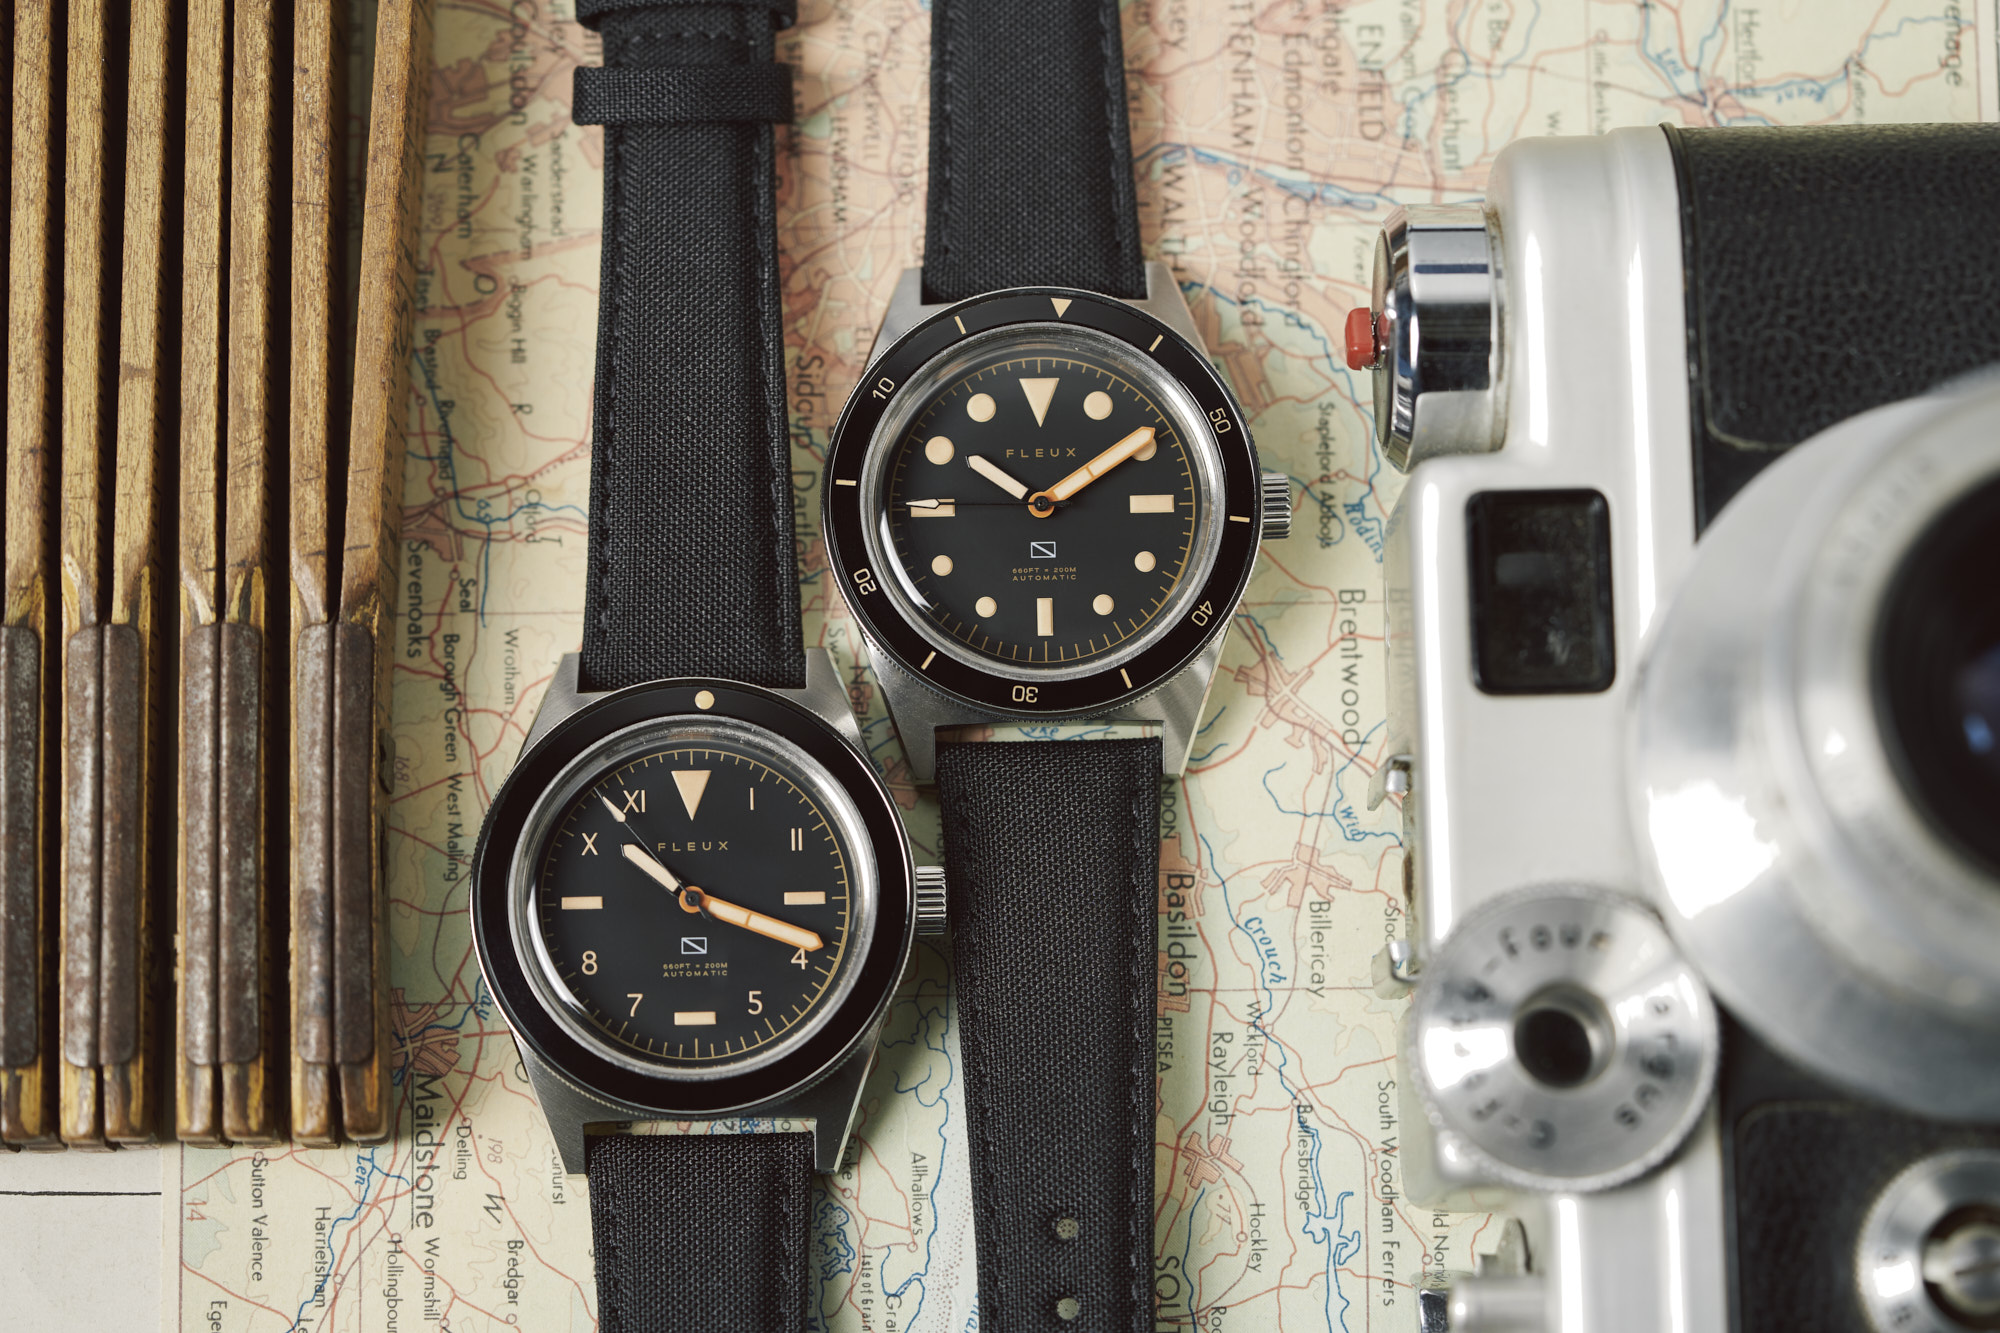 Hands-On: Fleux Skin Divers Balance Throwback Inspiration with Modern ...